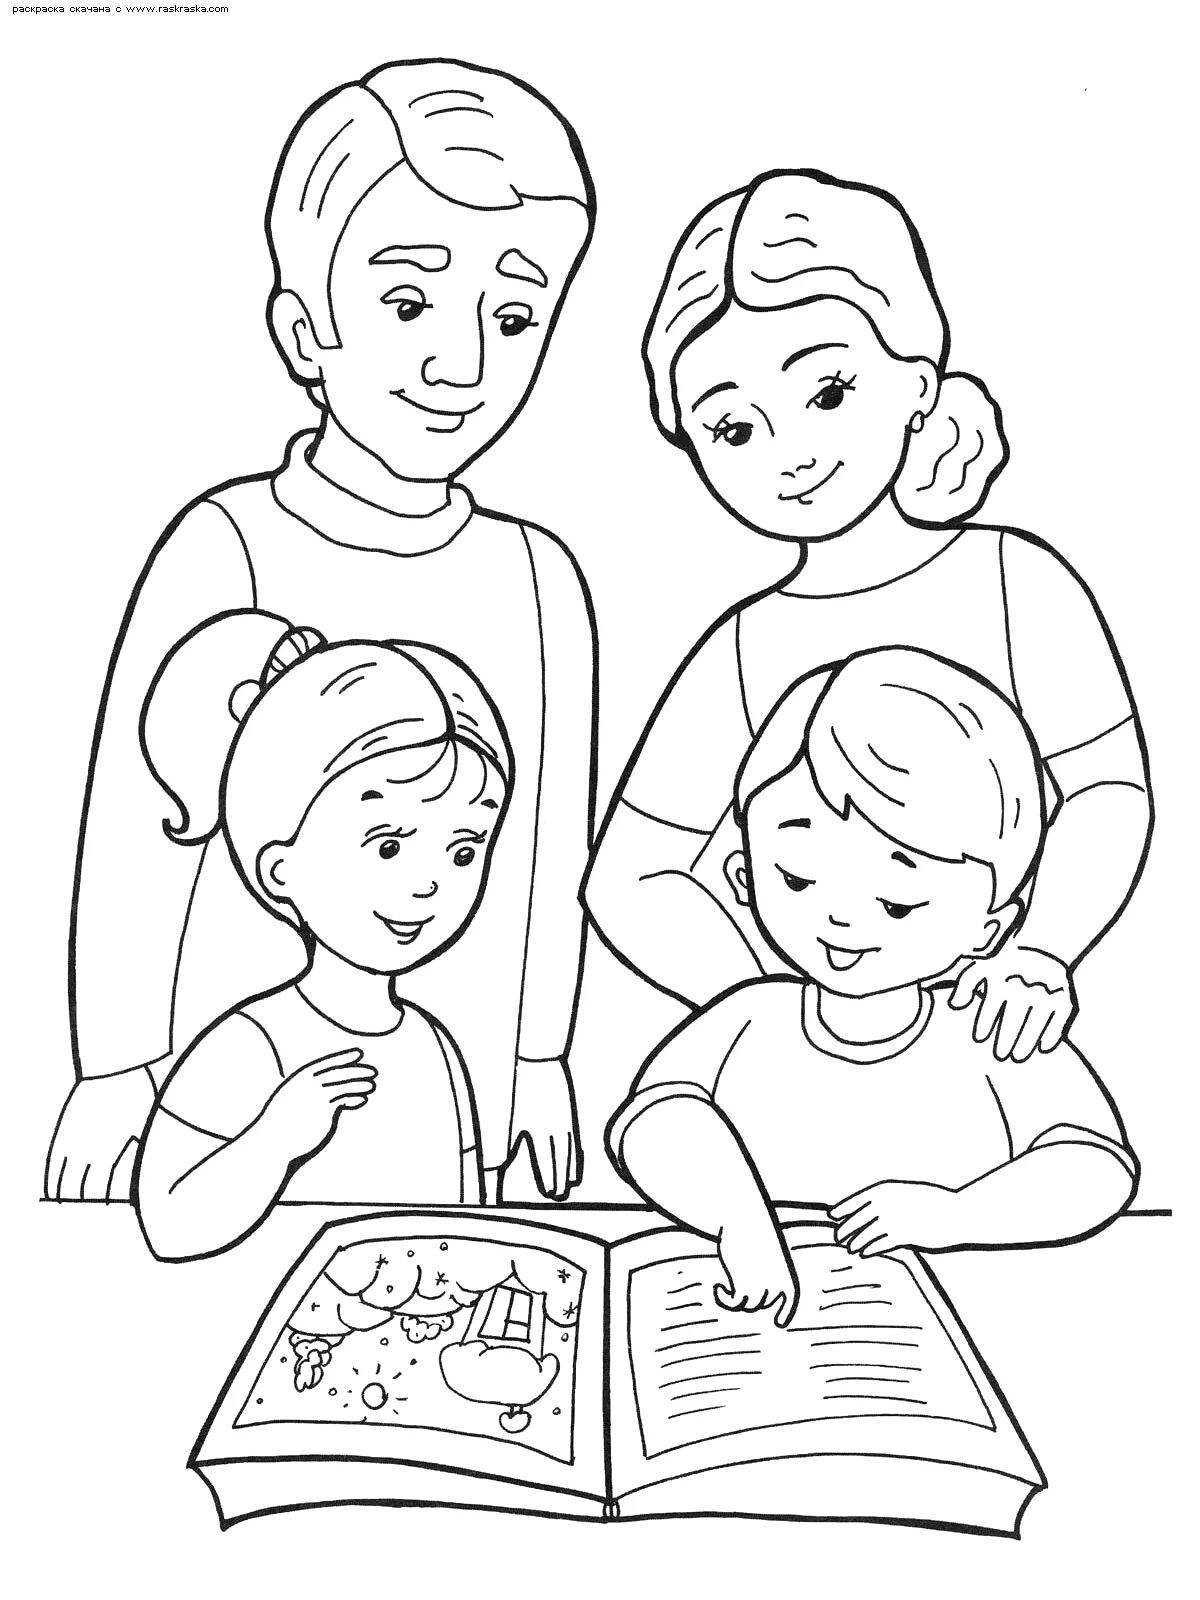 Affectionate family coloring book